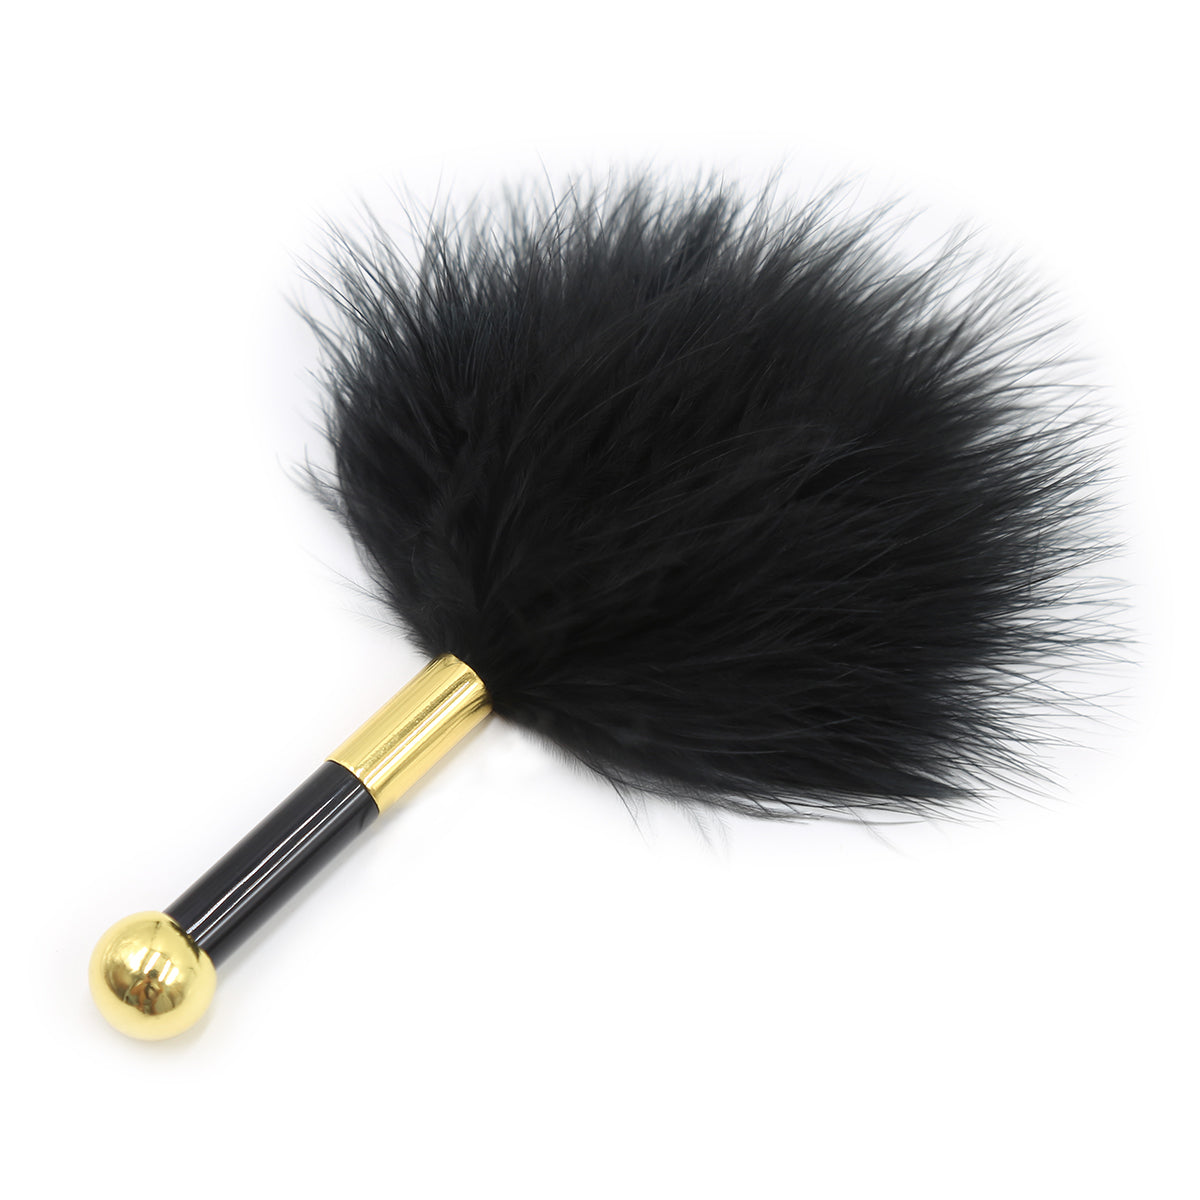 Feather Tickler with Acrylic Metal Wand